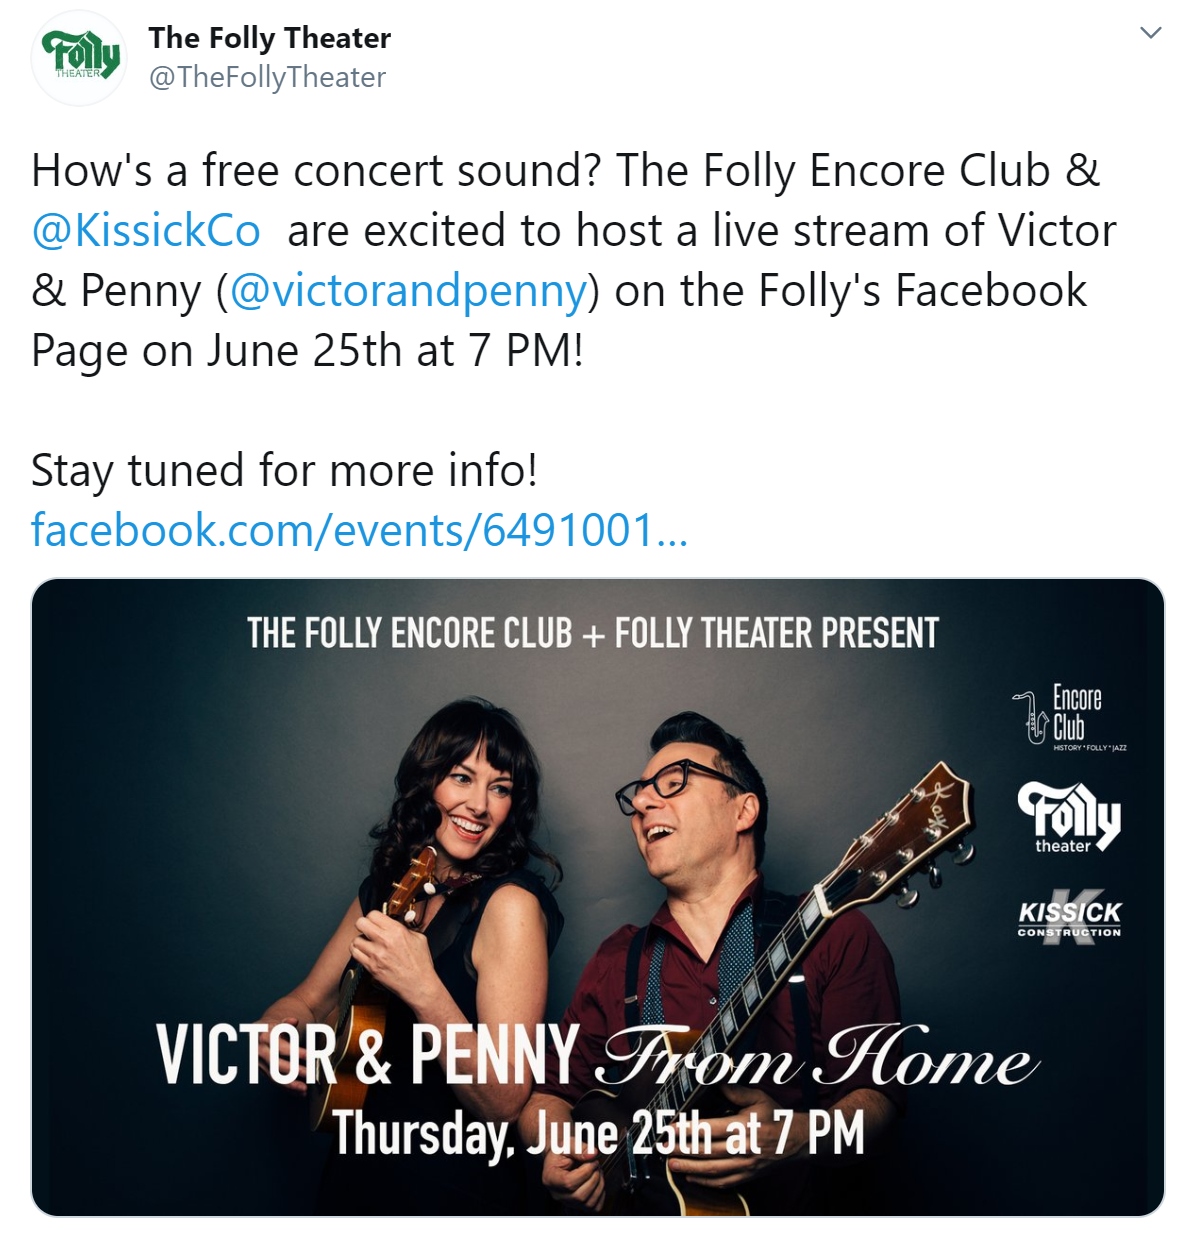 TheFollyTheater free streaming concert